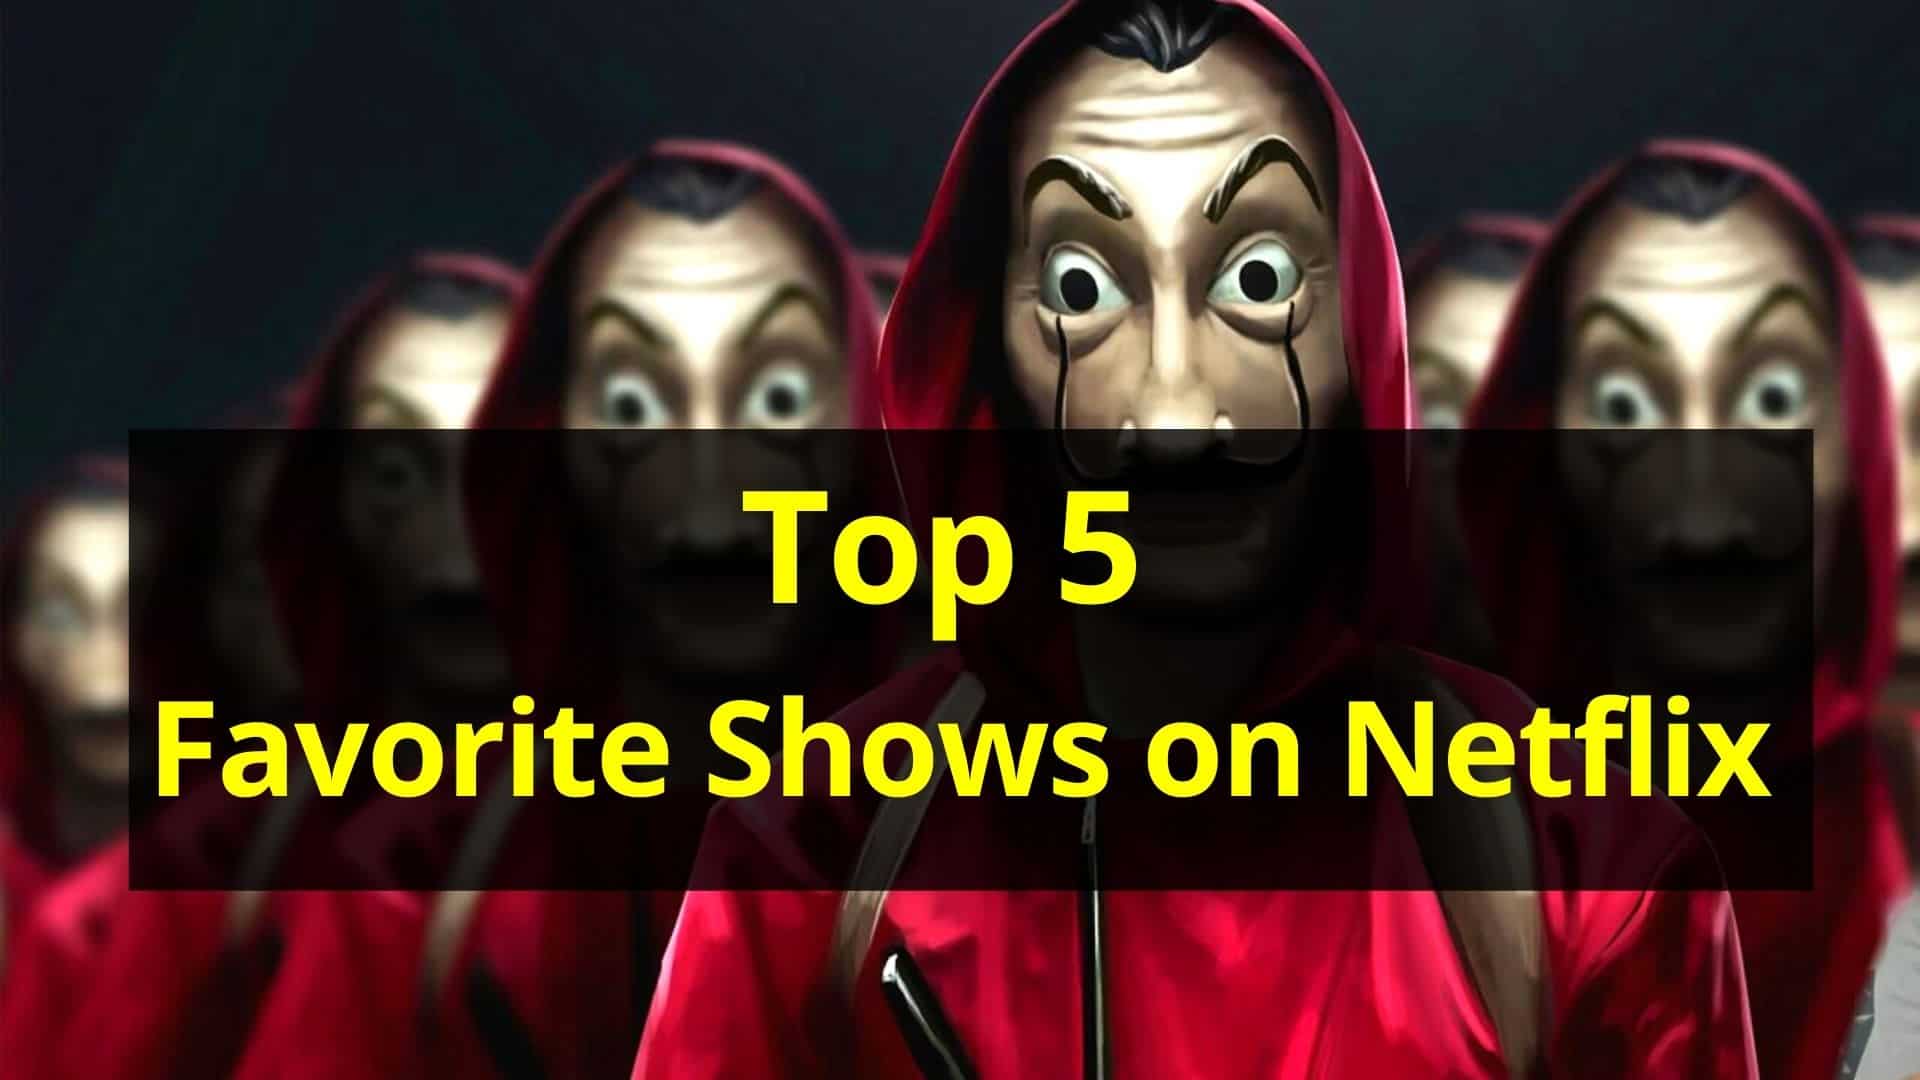 5 favorite shows